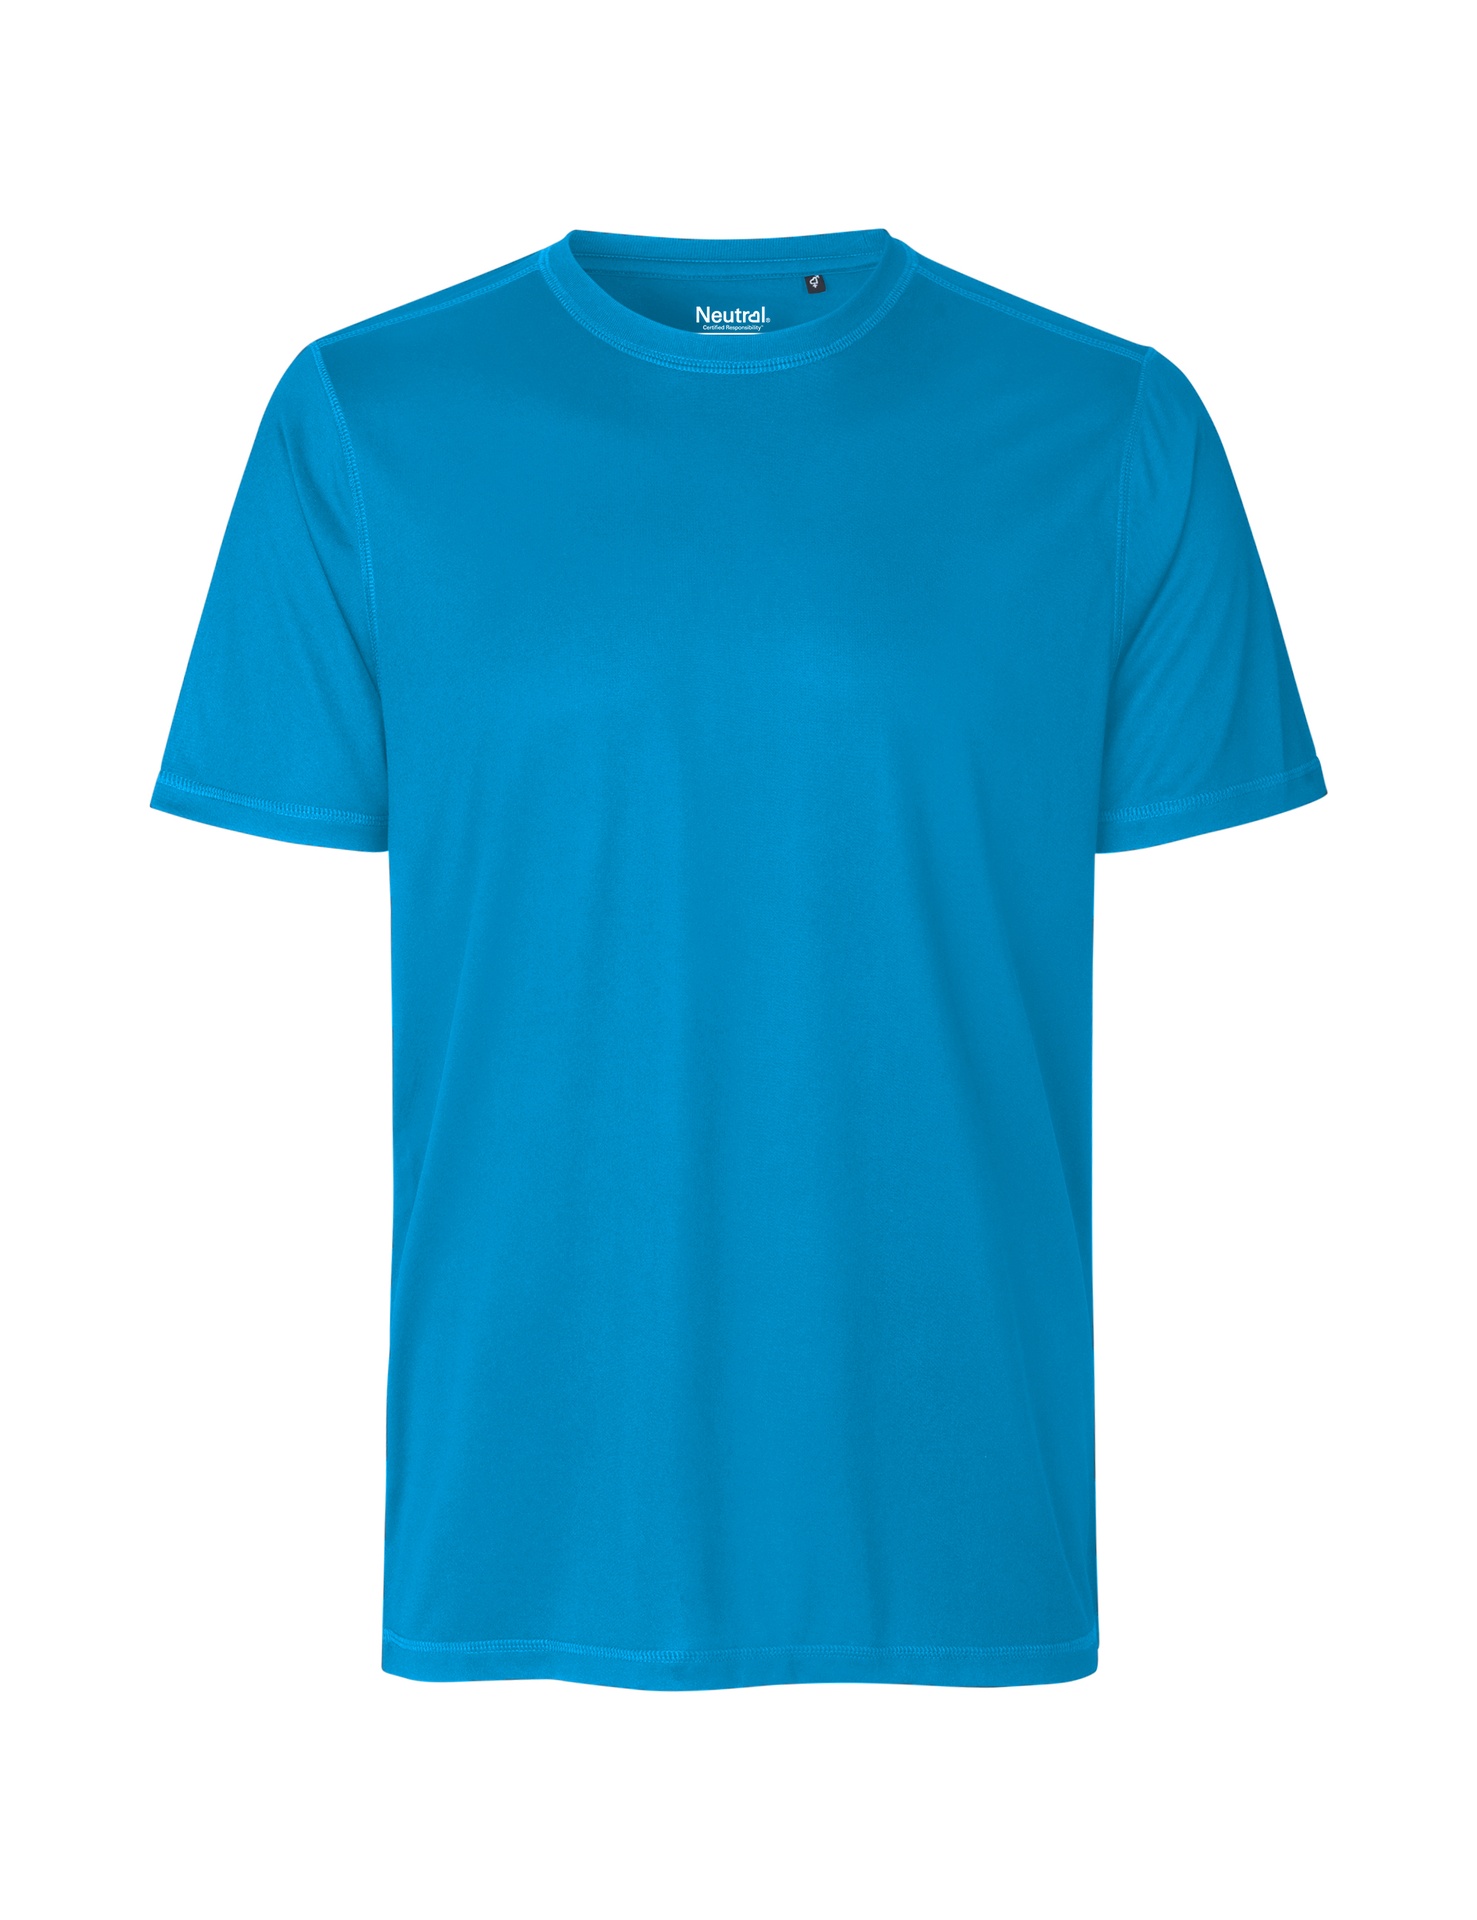 [PR/03784] Recycled Performance T-Shirt (Sapphire 27, S)